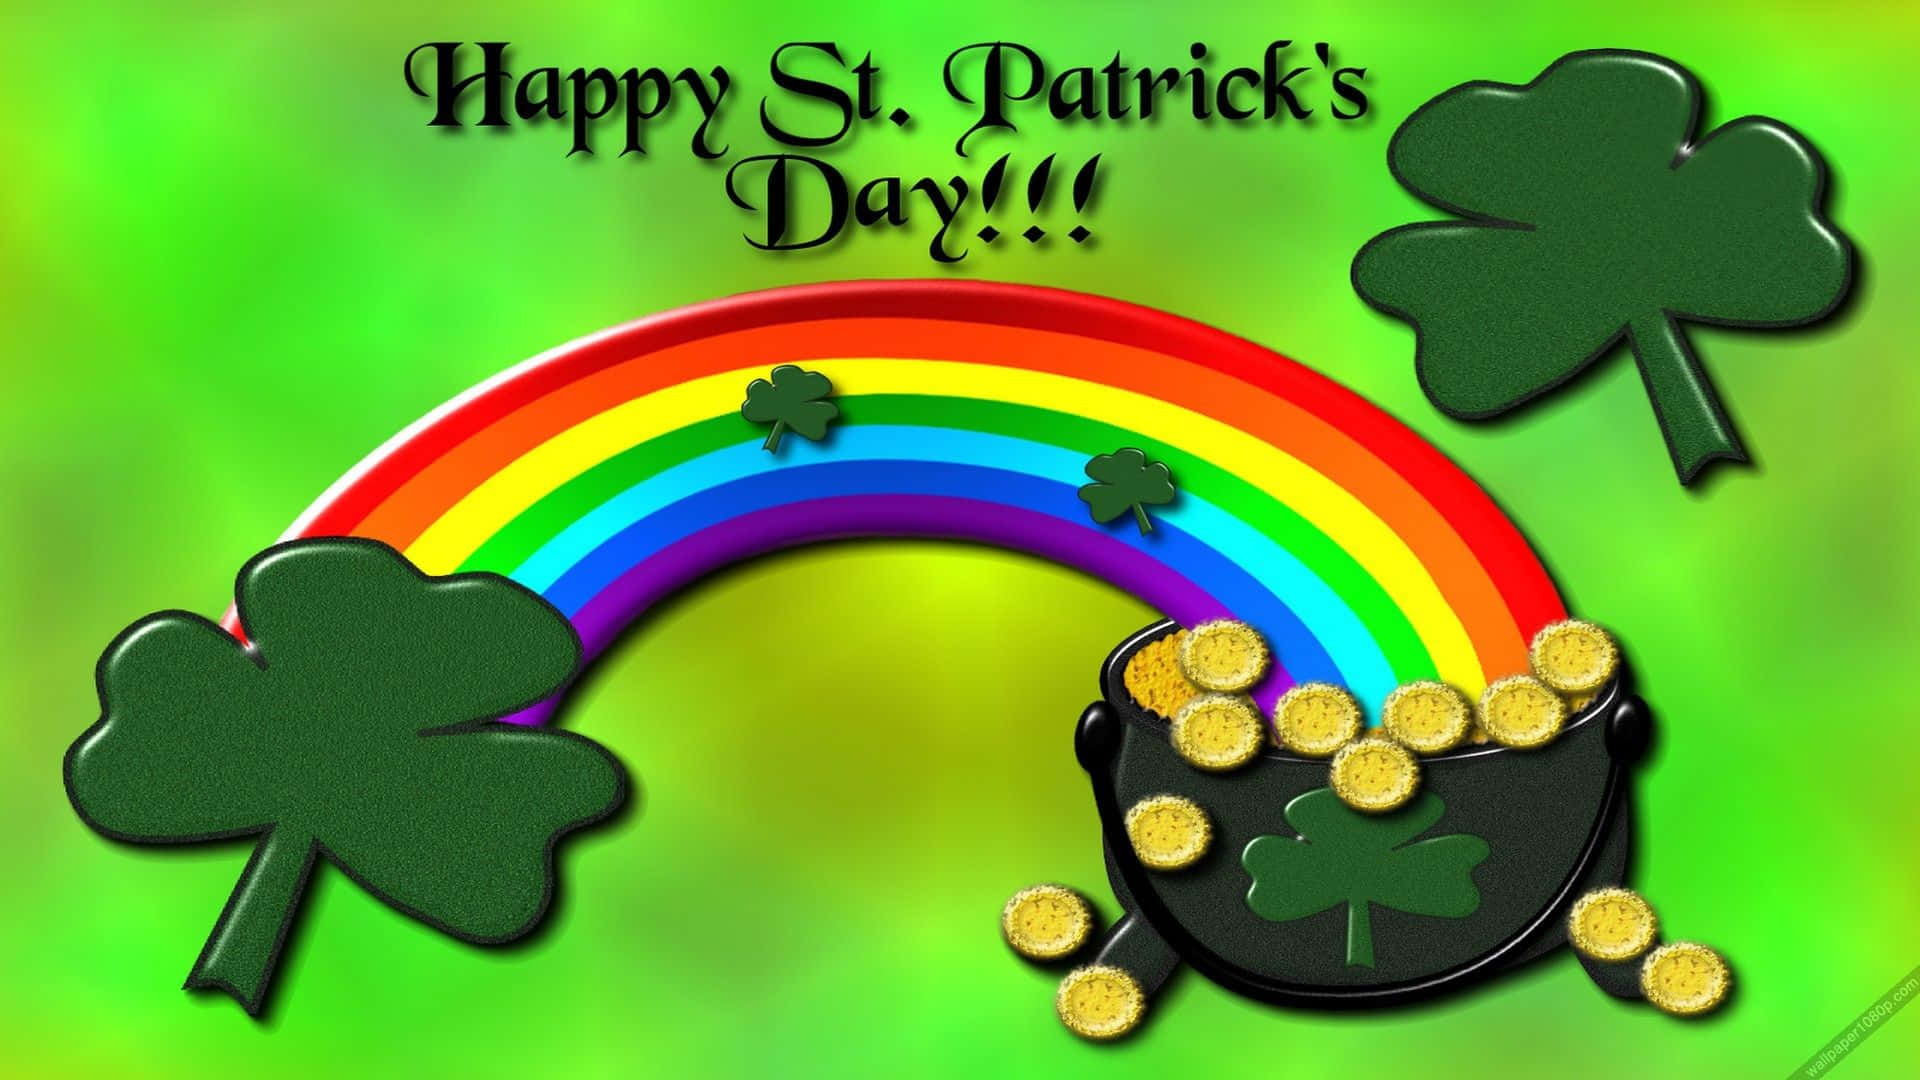 Image  Celebrate St Patrick's Day with a Zoom Background